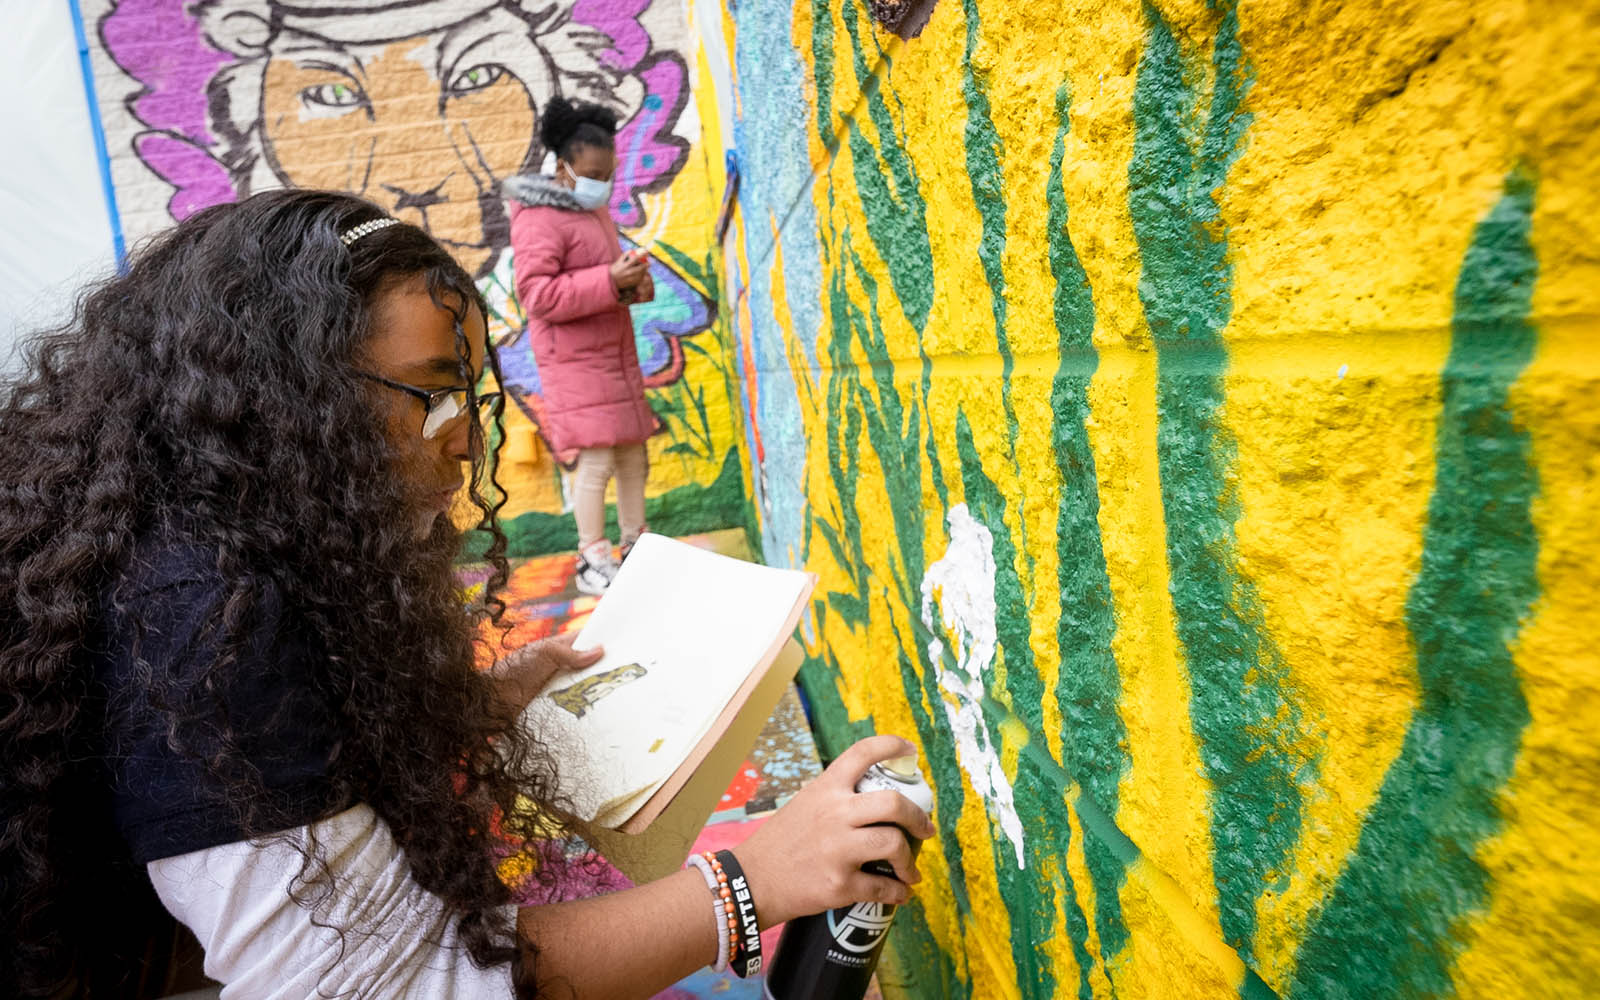 A medium skinned black girl with long curly hair raises a spray can to paint a outdoor mural while another girl paints in the background.